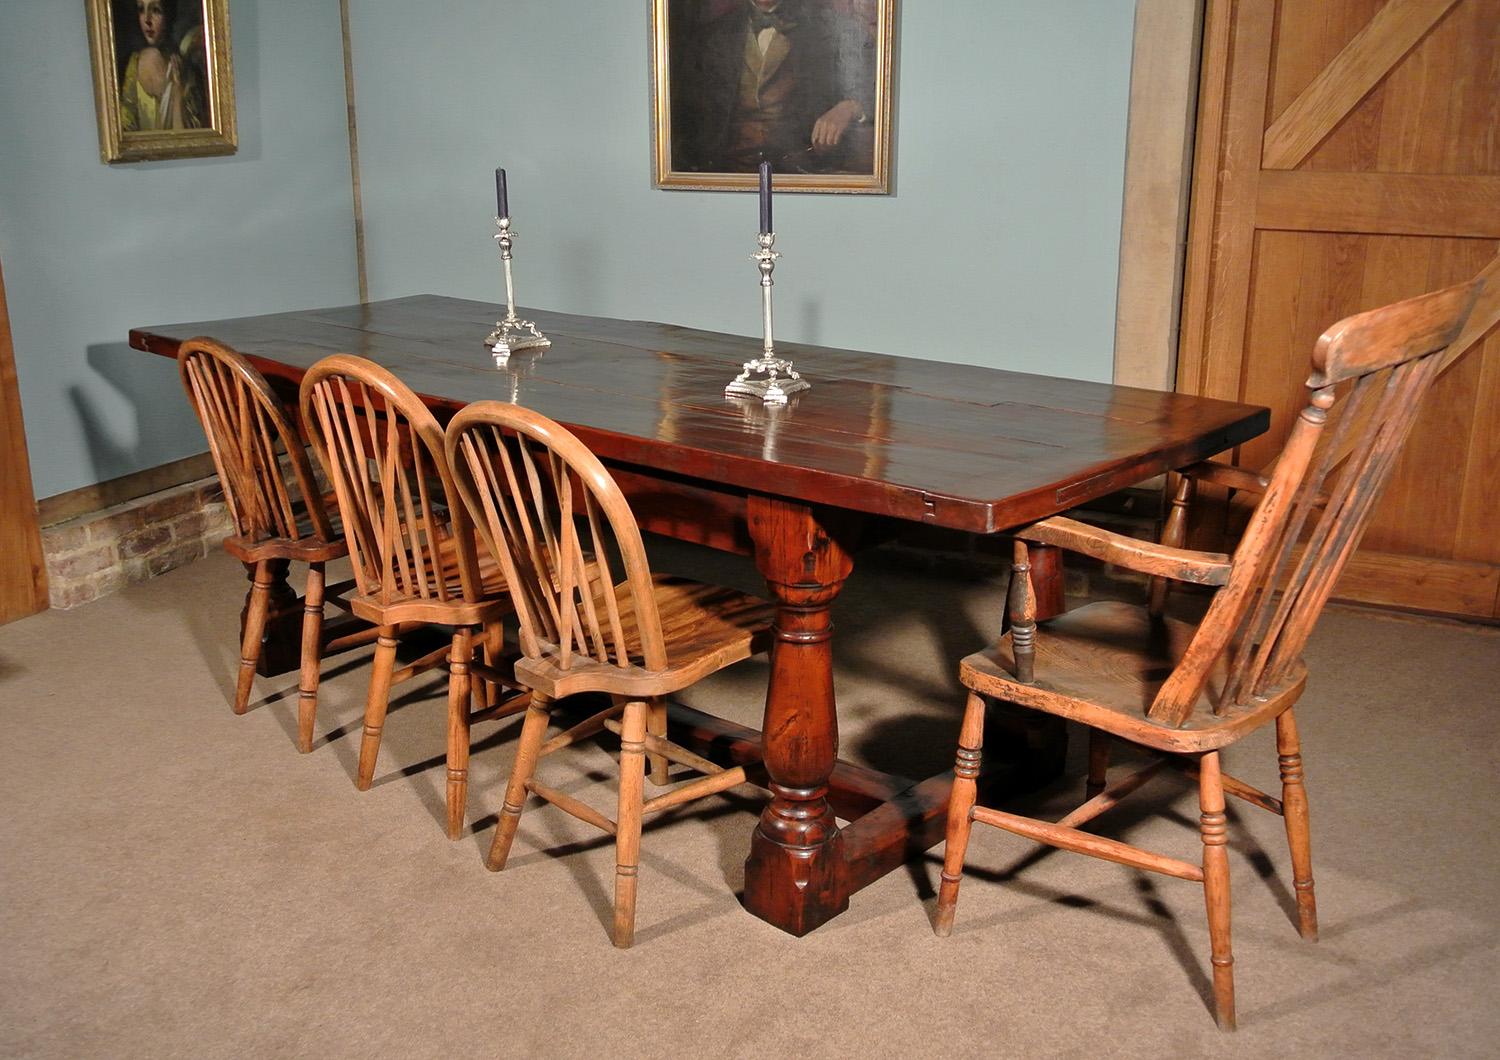 A beautiful 17th century refectory table made from substantial yew wood timbers and with attractive top of four varying width boards with some slight shrinkage and undulations, with cleated ends and set on four large baluster turned legs united by a